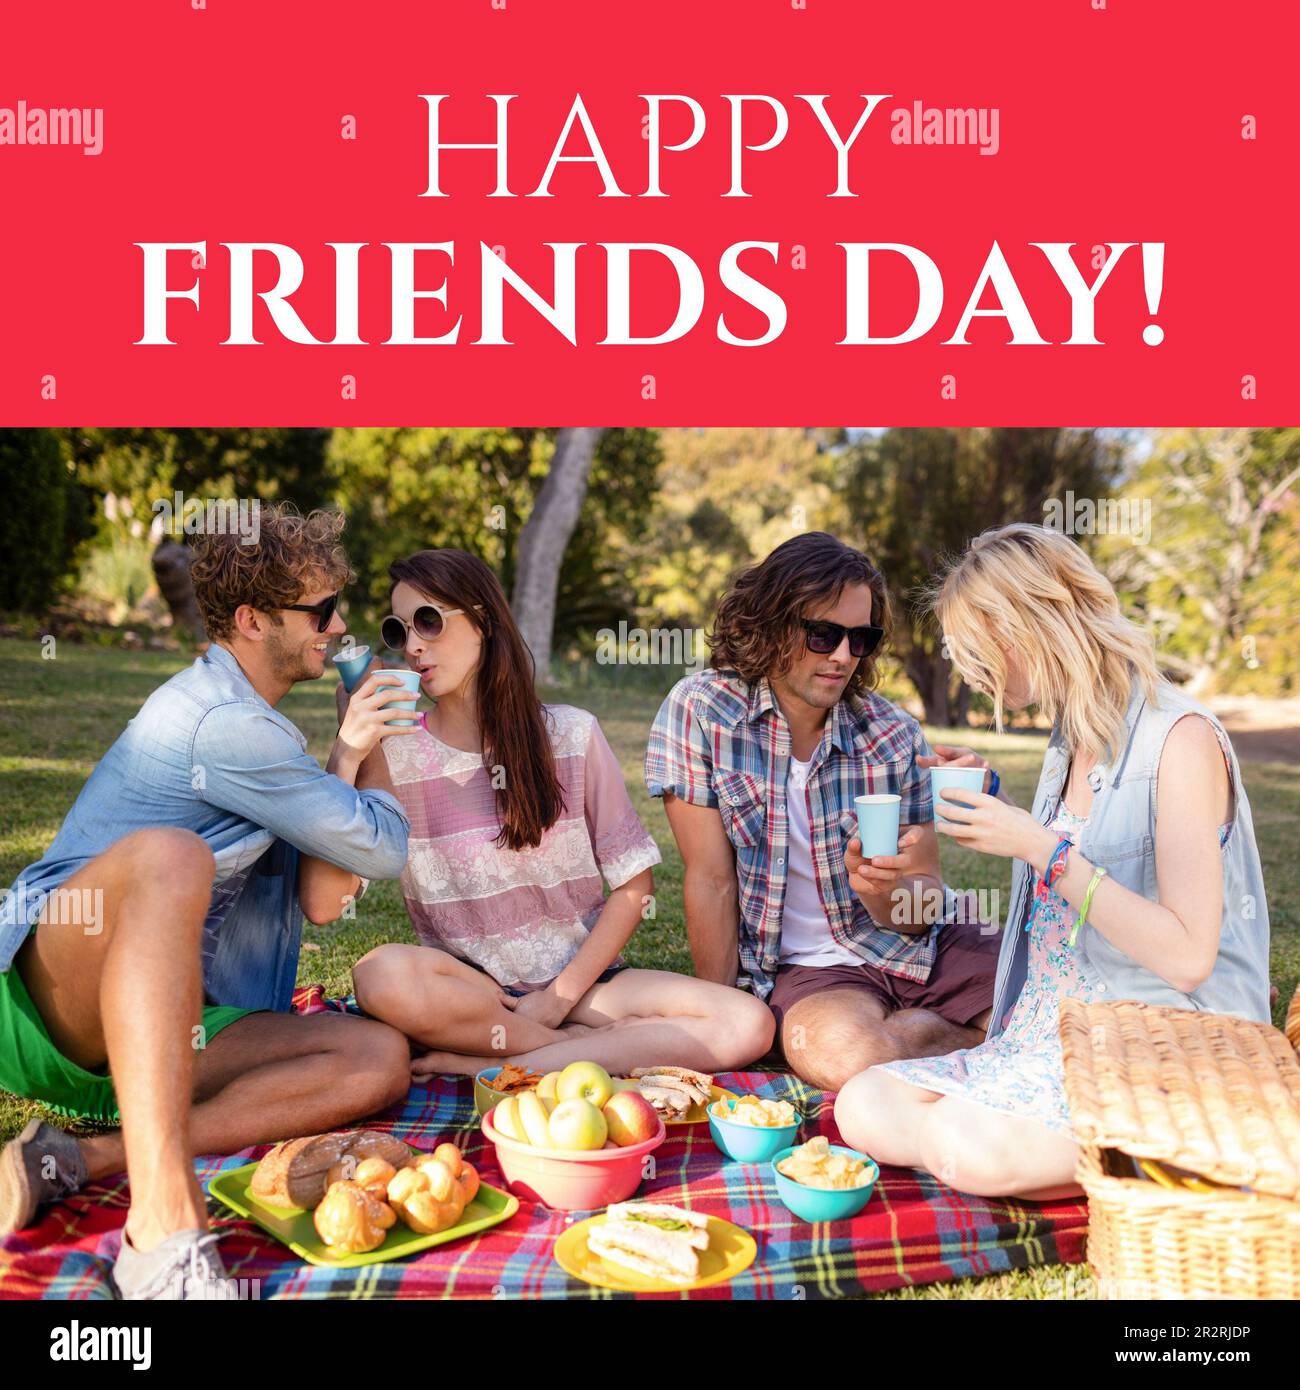 Composition of happy friends day text over happy caucasian friends having picnic in park Stock Photo